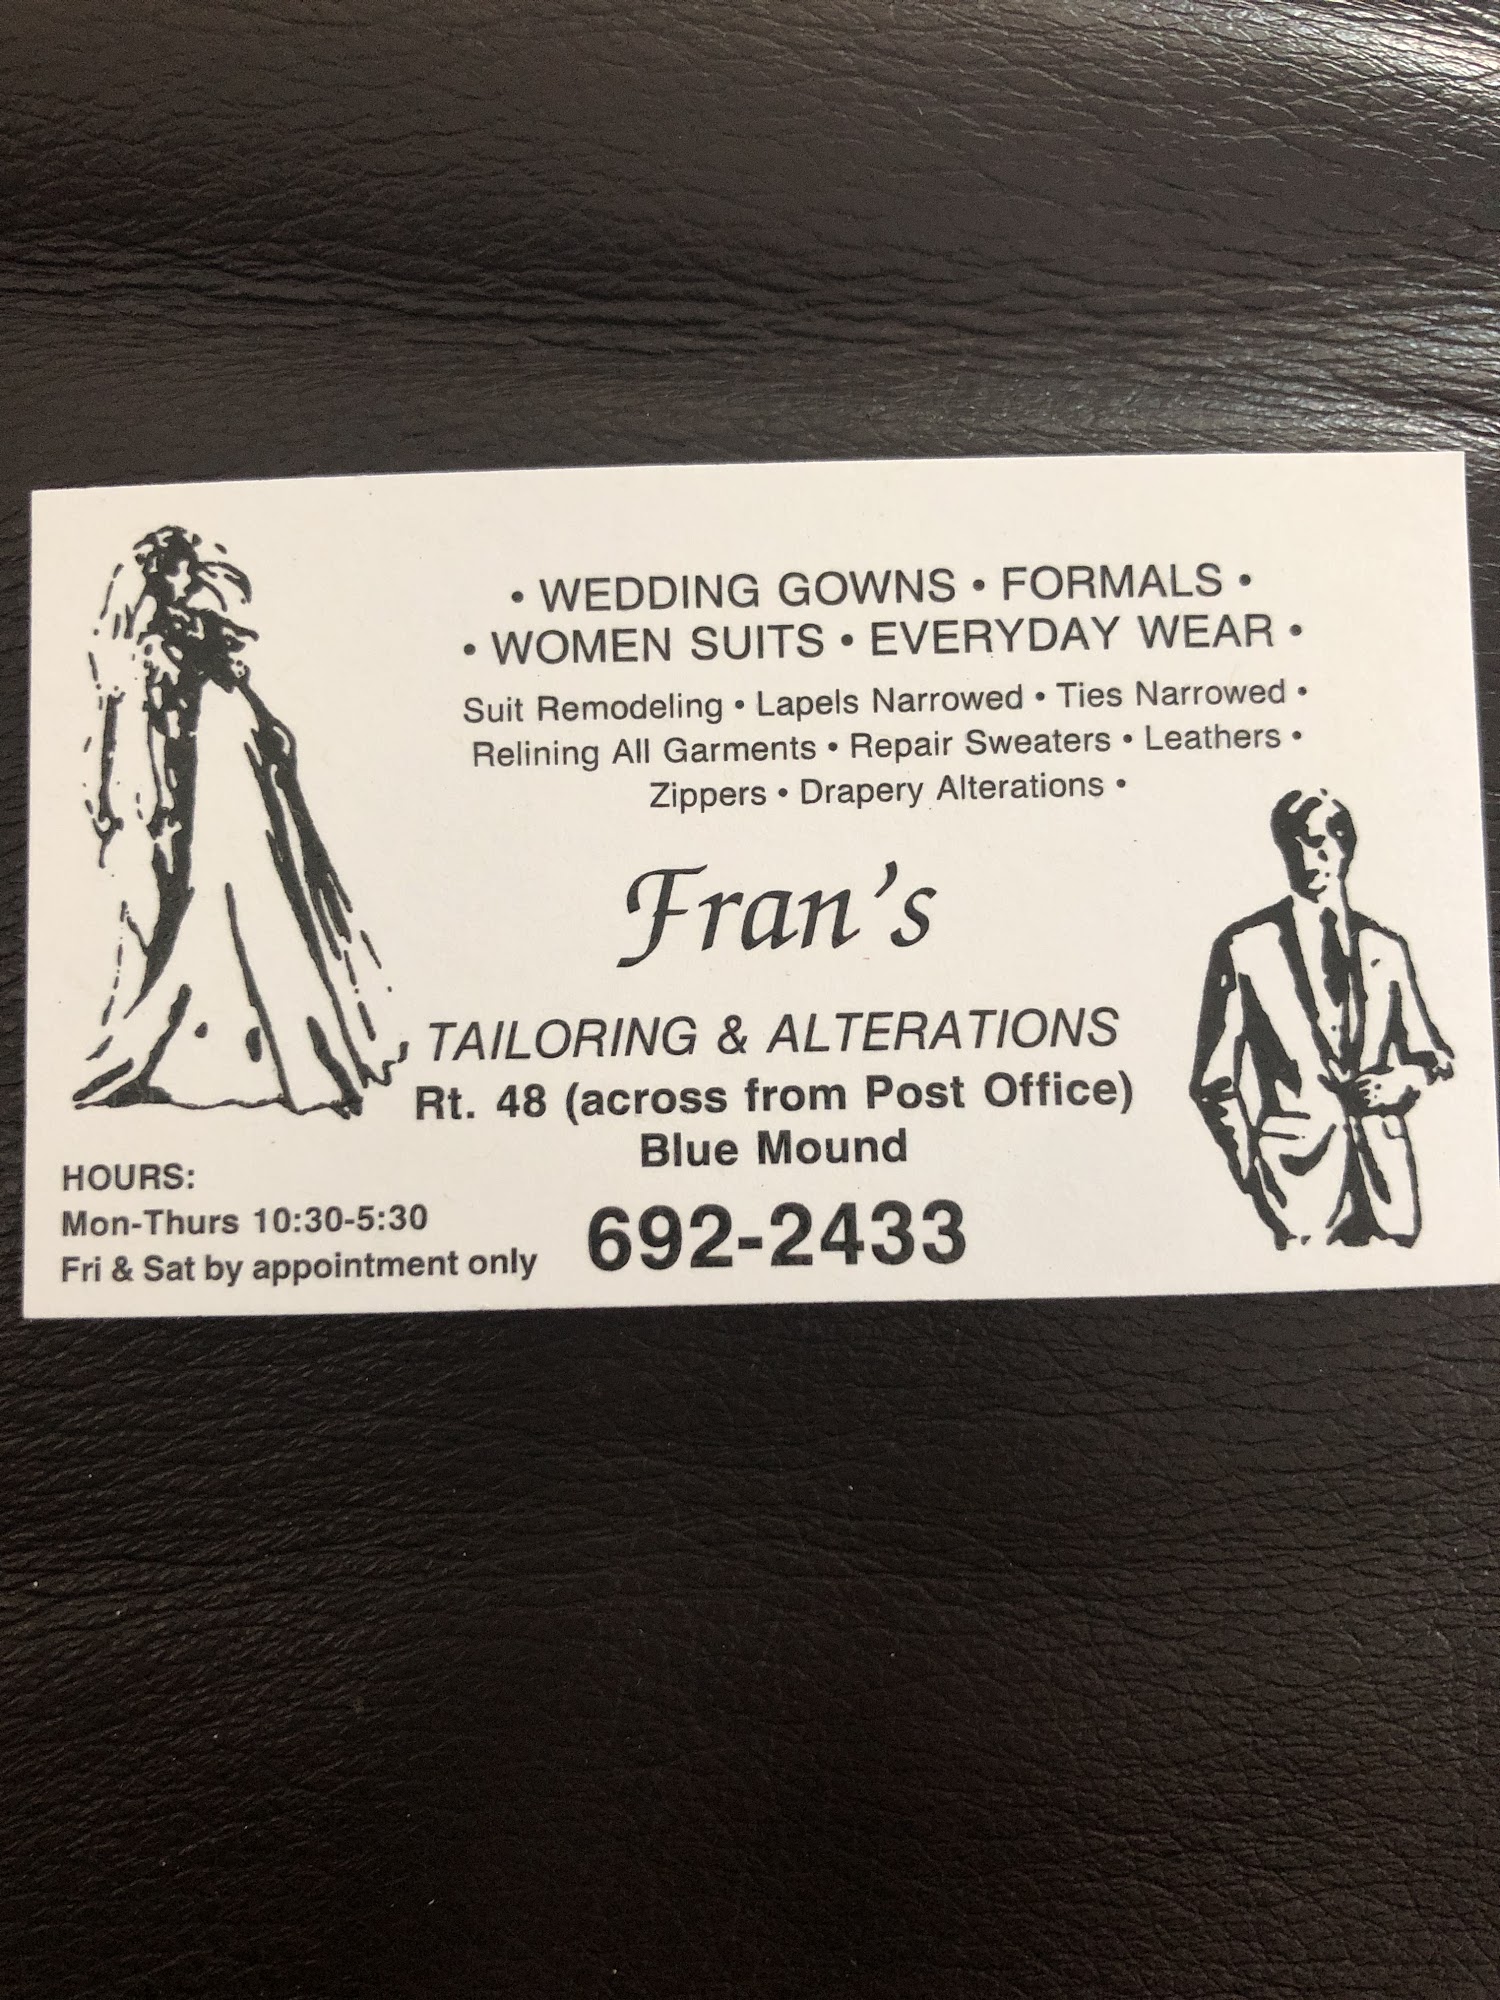 Fran's Tailoring & Alterations 217 Railroad Ave, Blue Mound Illinois 62513